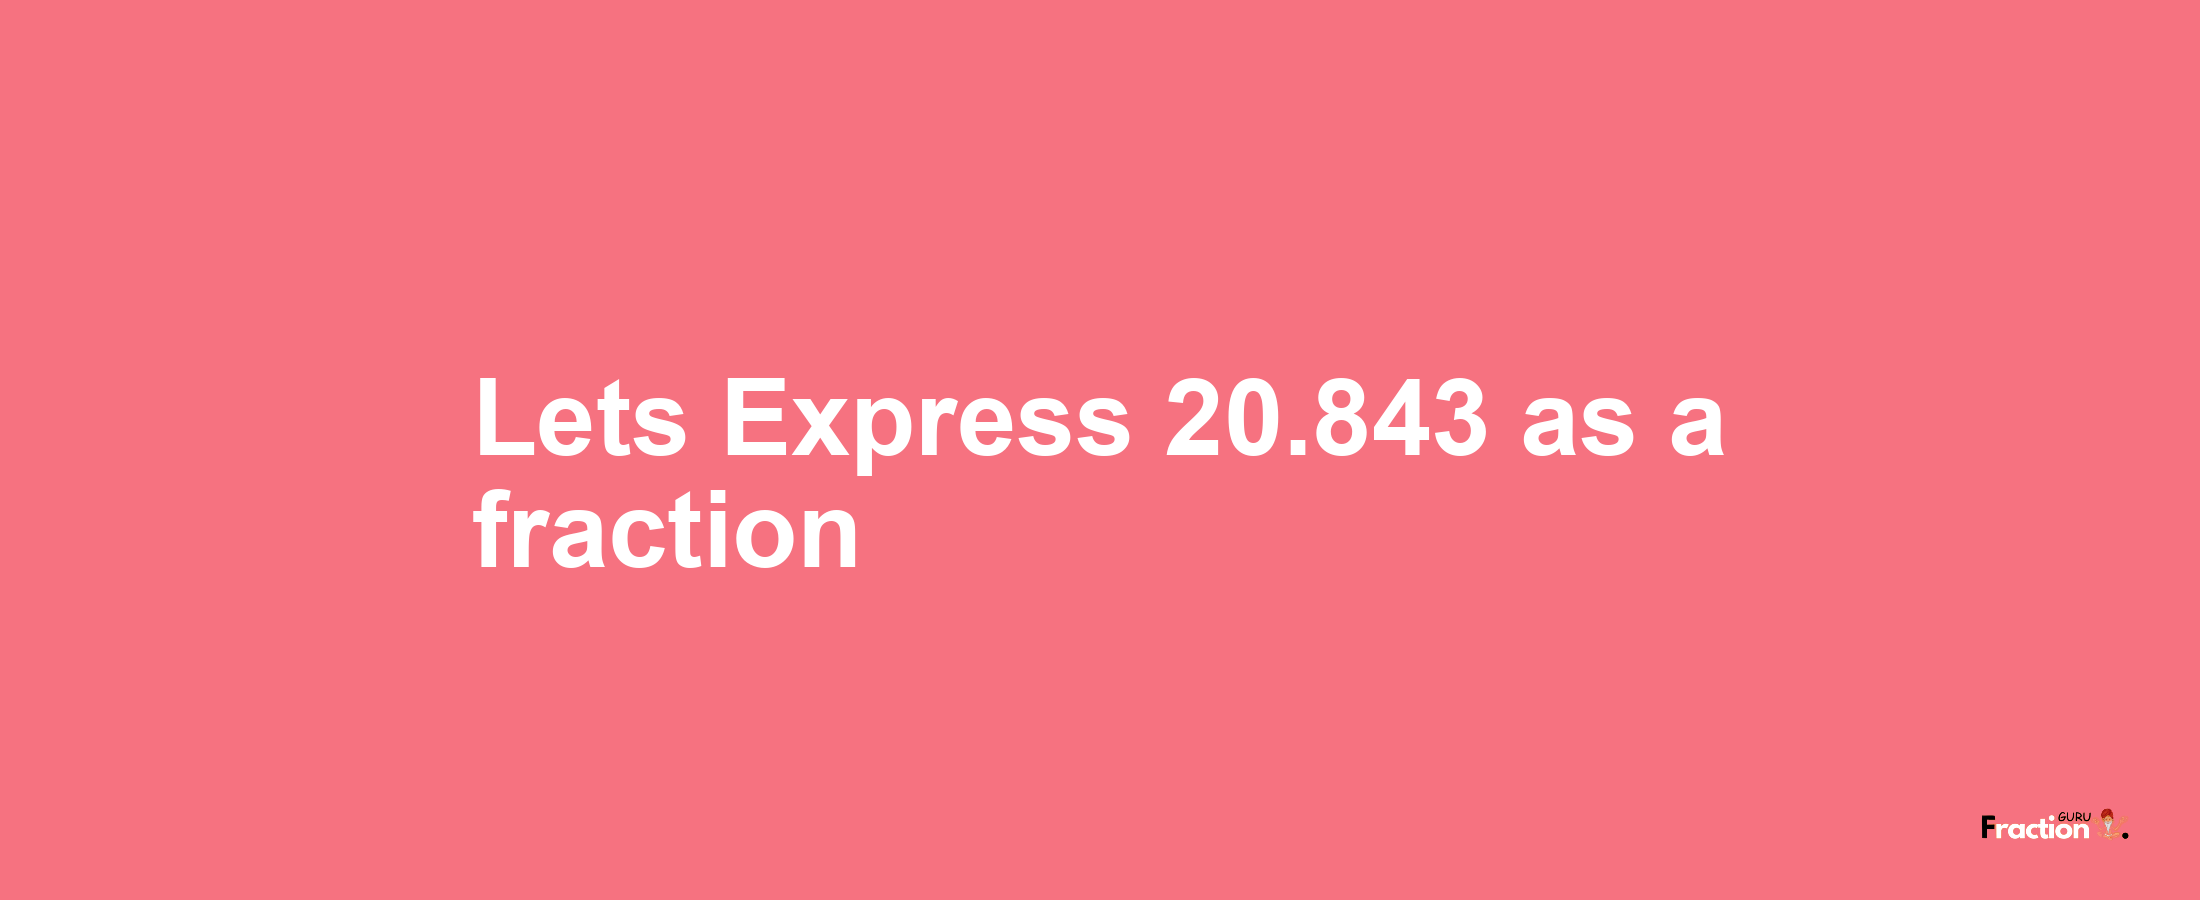 Lets Express 20.843 as afraction